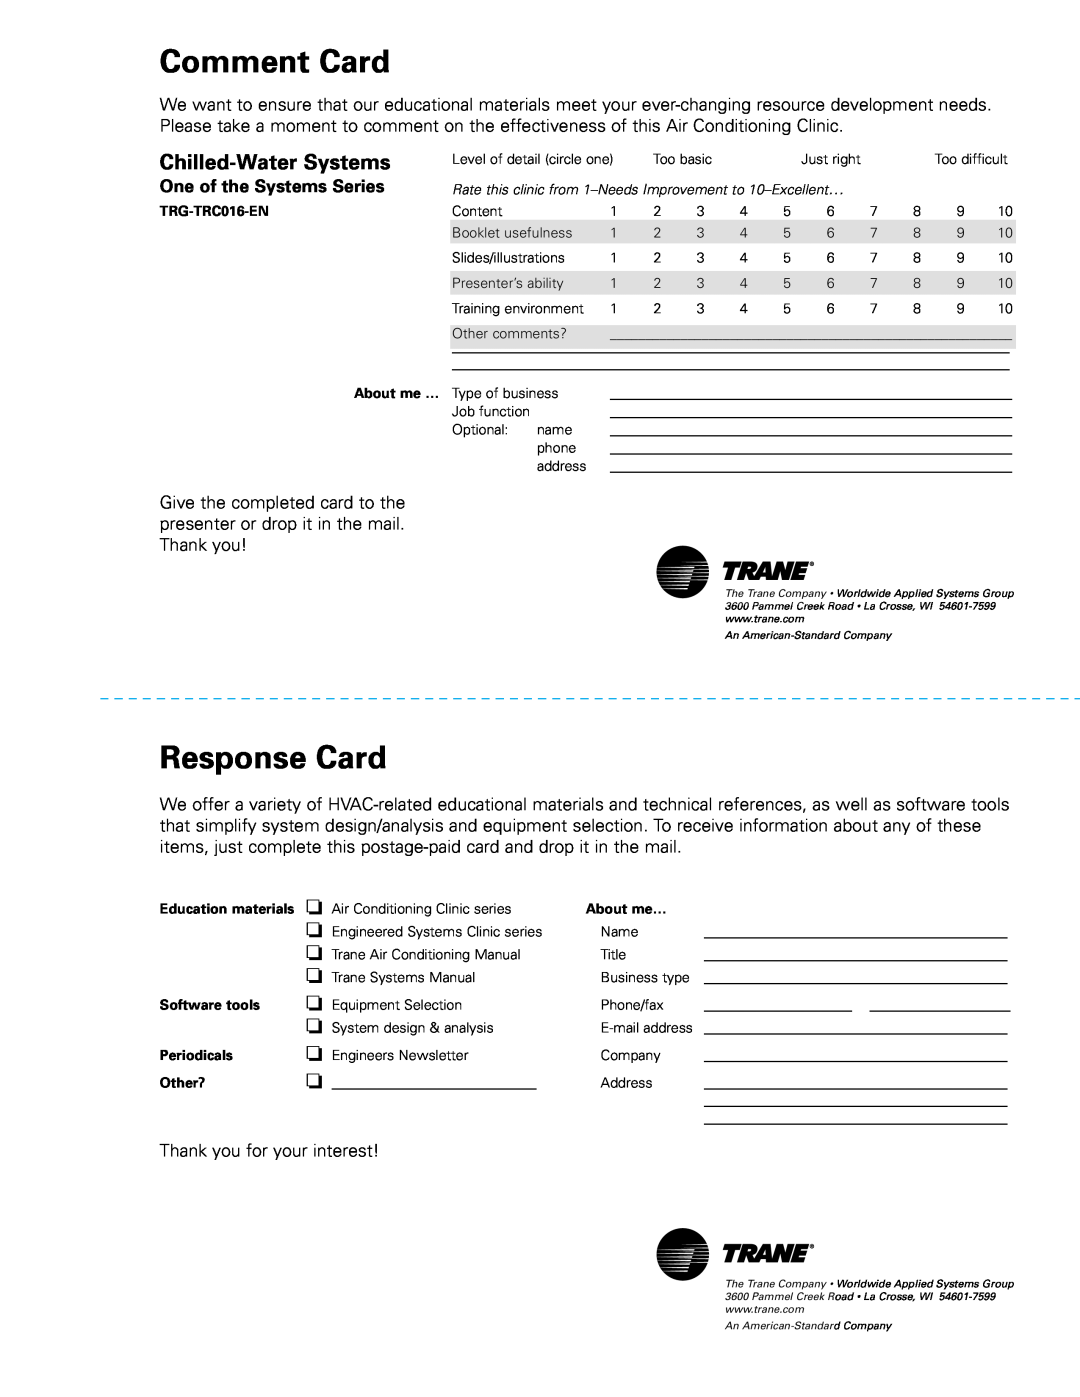 Trane TRG-TRC016-EN manual Comment Card, Response Card, Chilled-WaterSystems, One of the Systems Series 